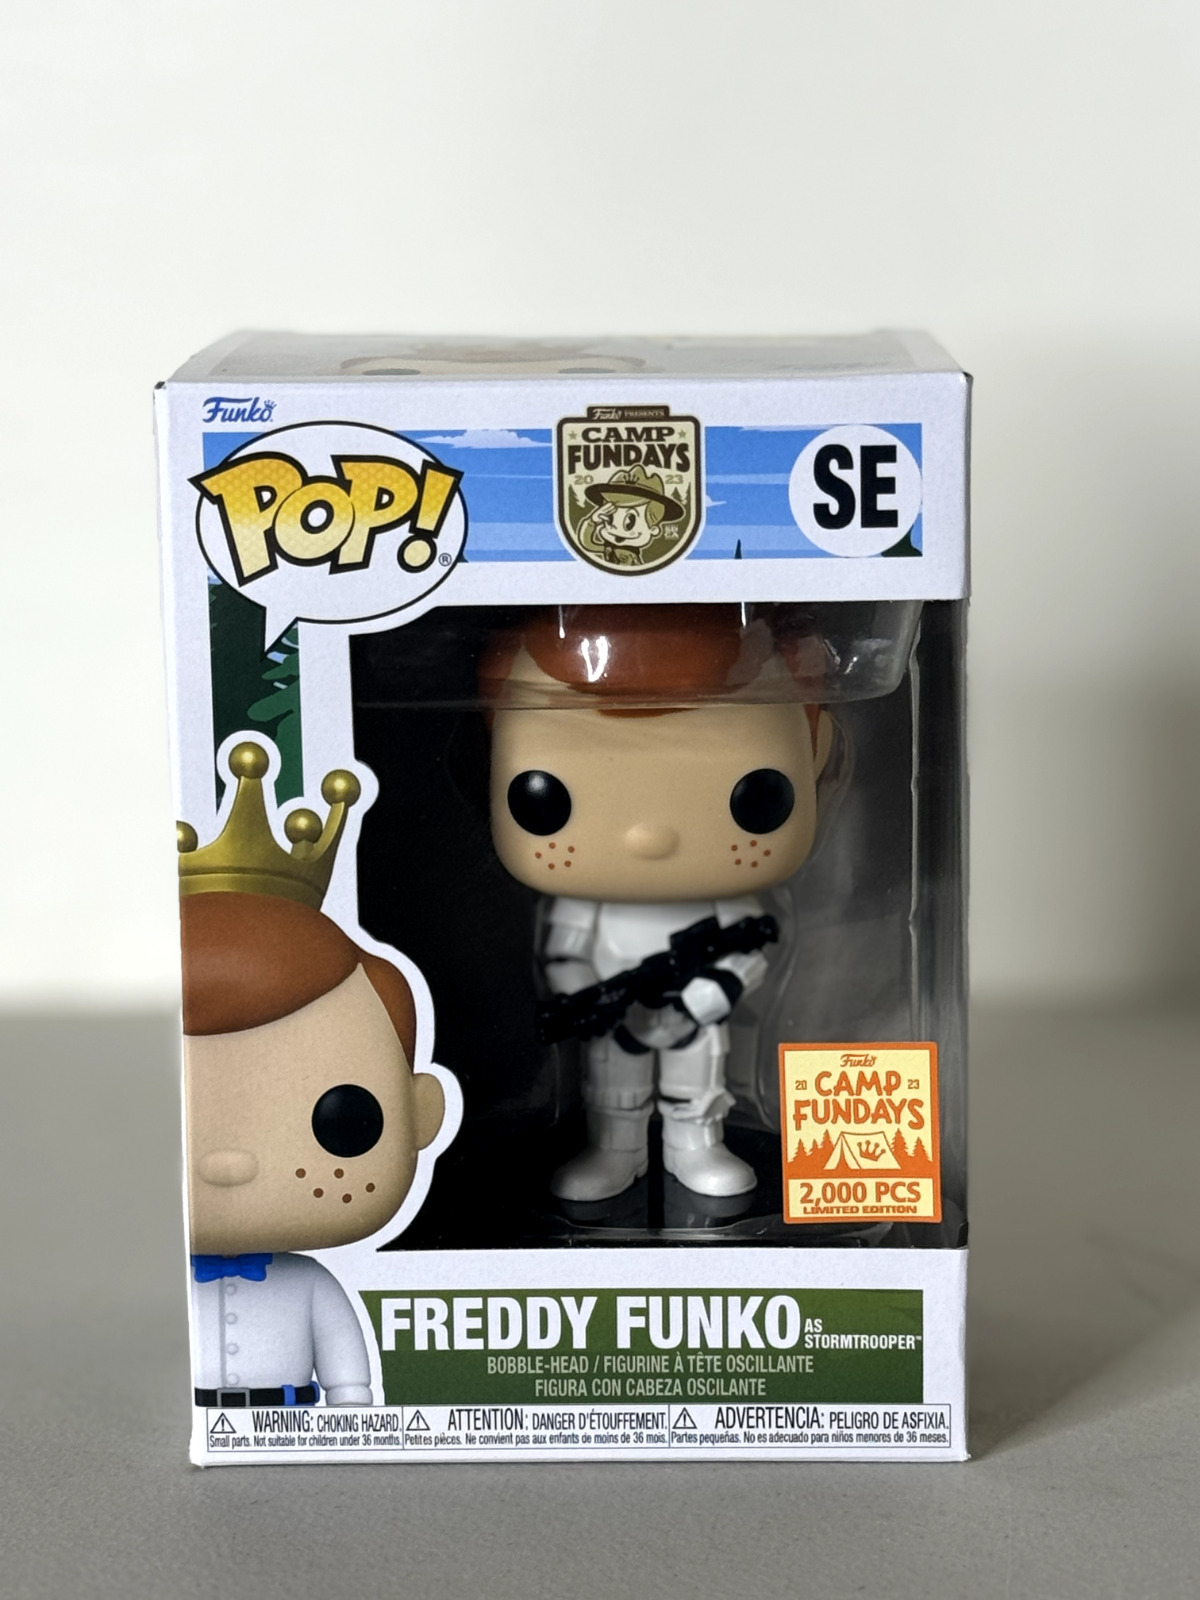 Funko PoP Camp Fundays Freddy Funko as Stormtrooper Vinyl Collectible